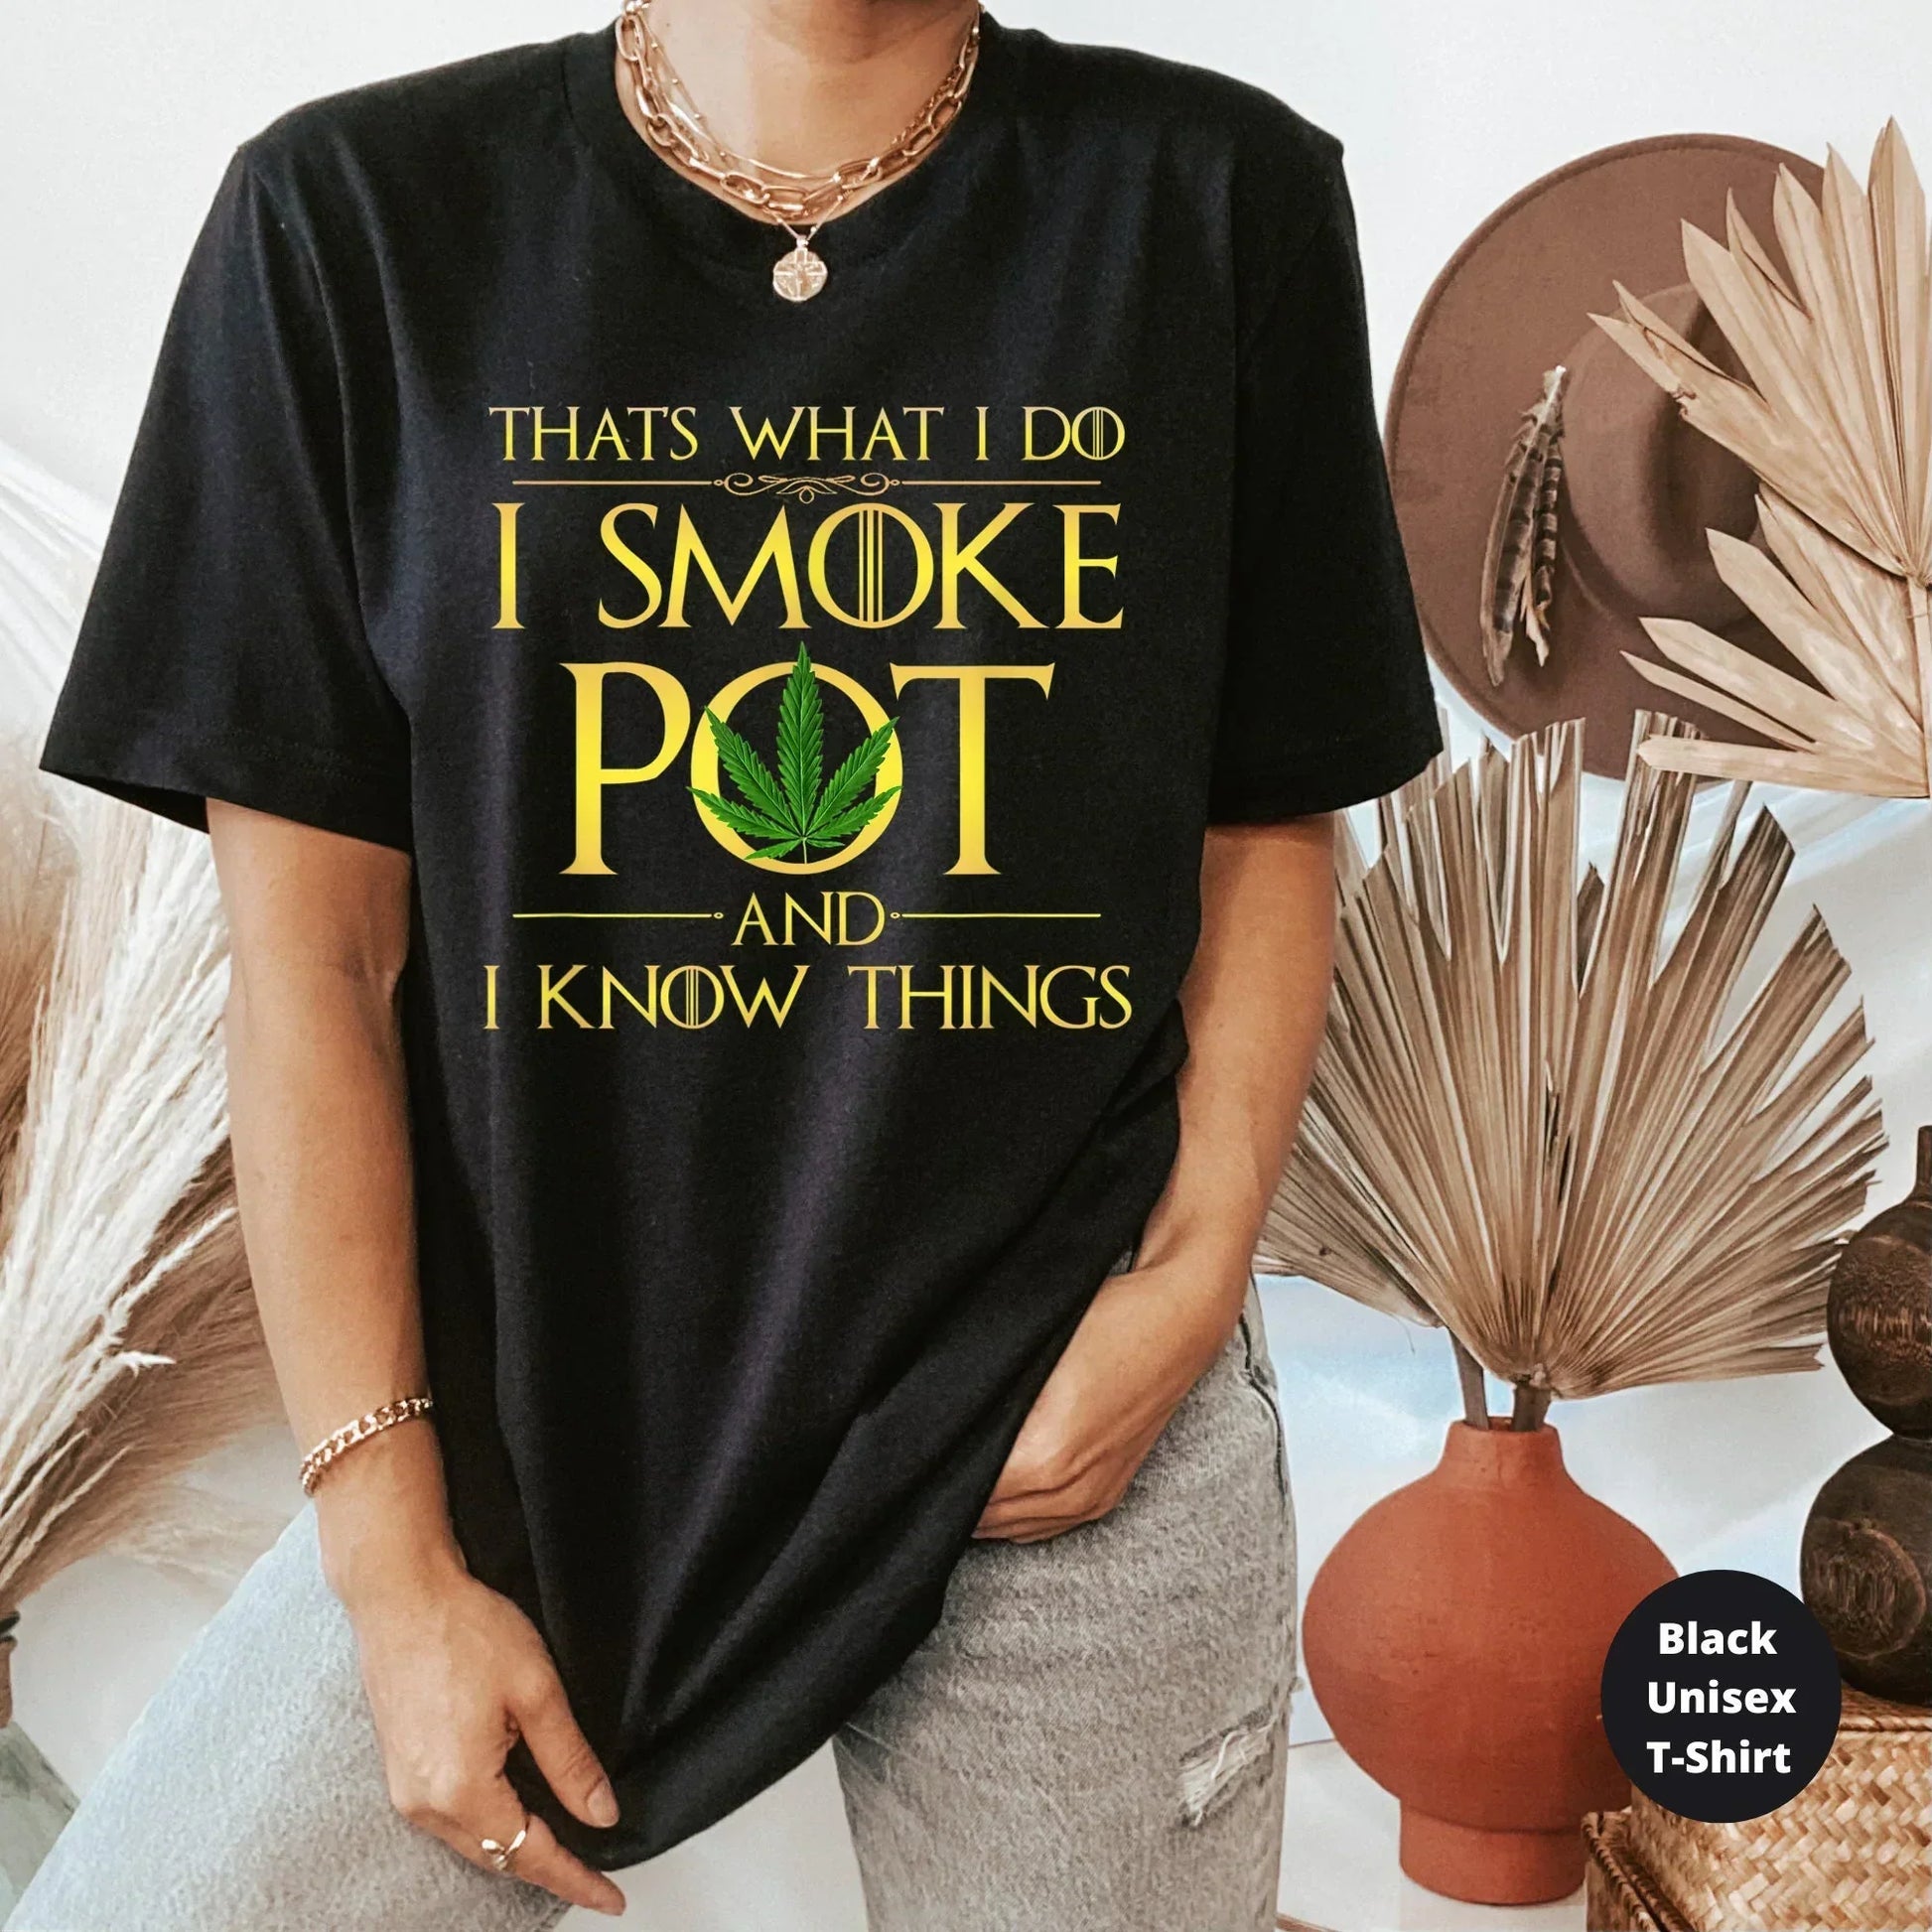 Hippie Clothes, Stoner Gifts, Weed Gifts, Weed Shirt, Stoner Gift, Stoner Girl, Stoner Gift for Him, Stoner Gift for Her, Marijuana T shirts HMDesignStudioUS